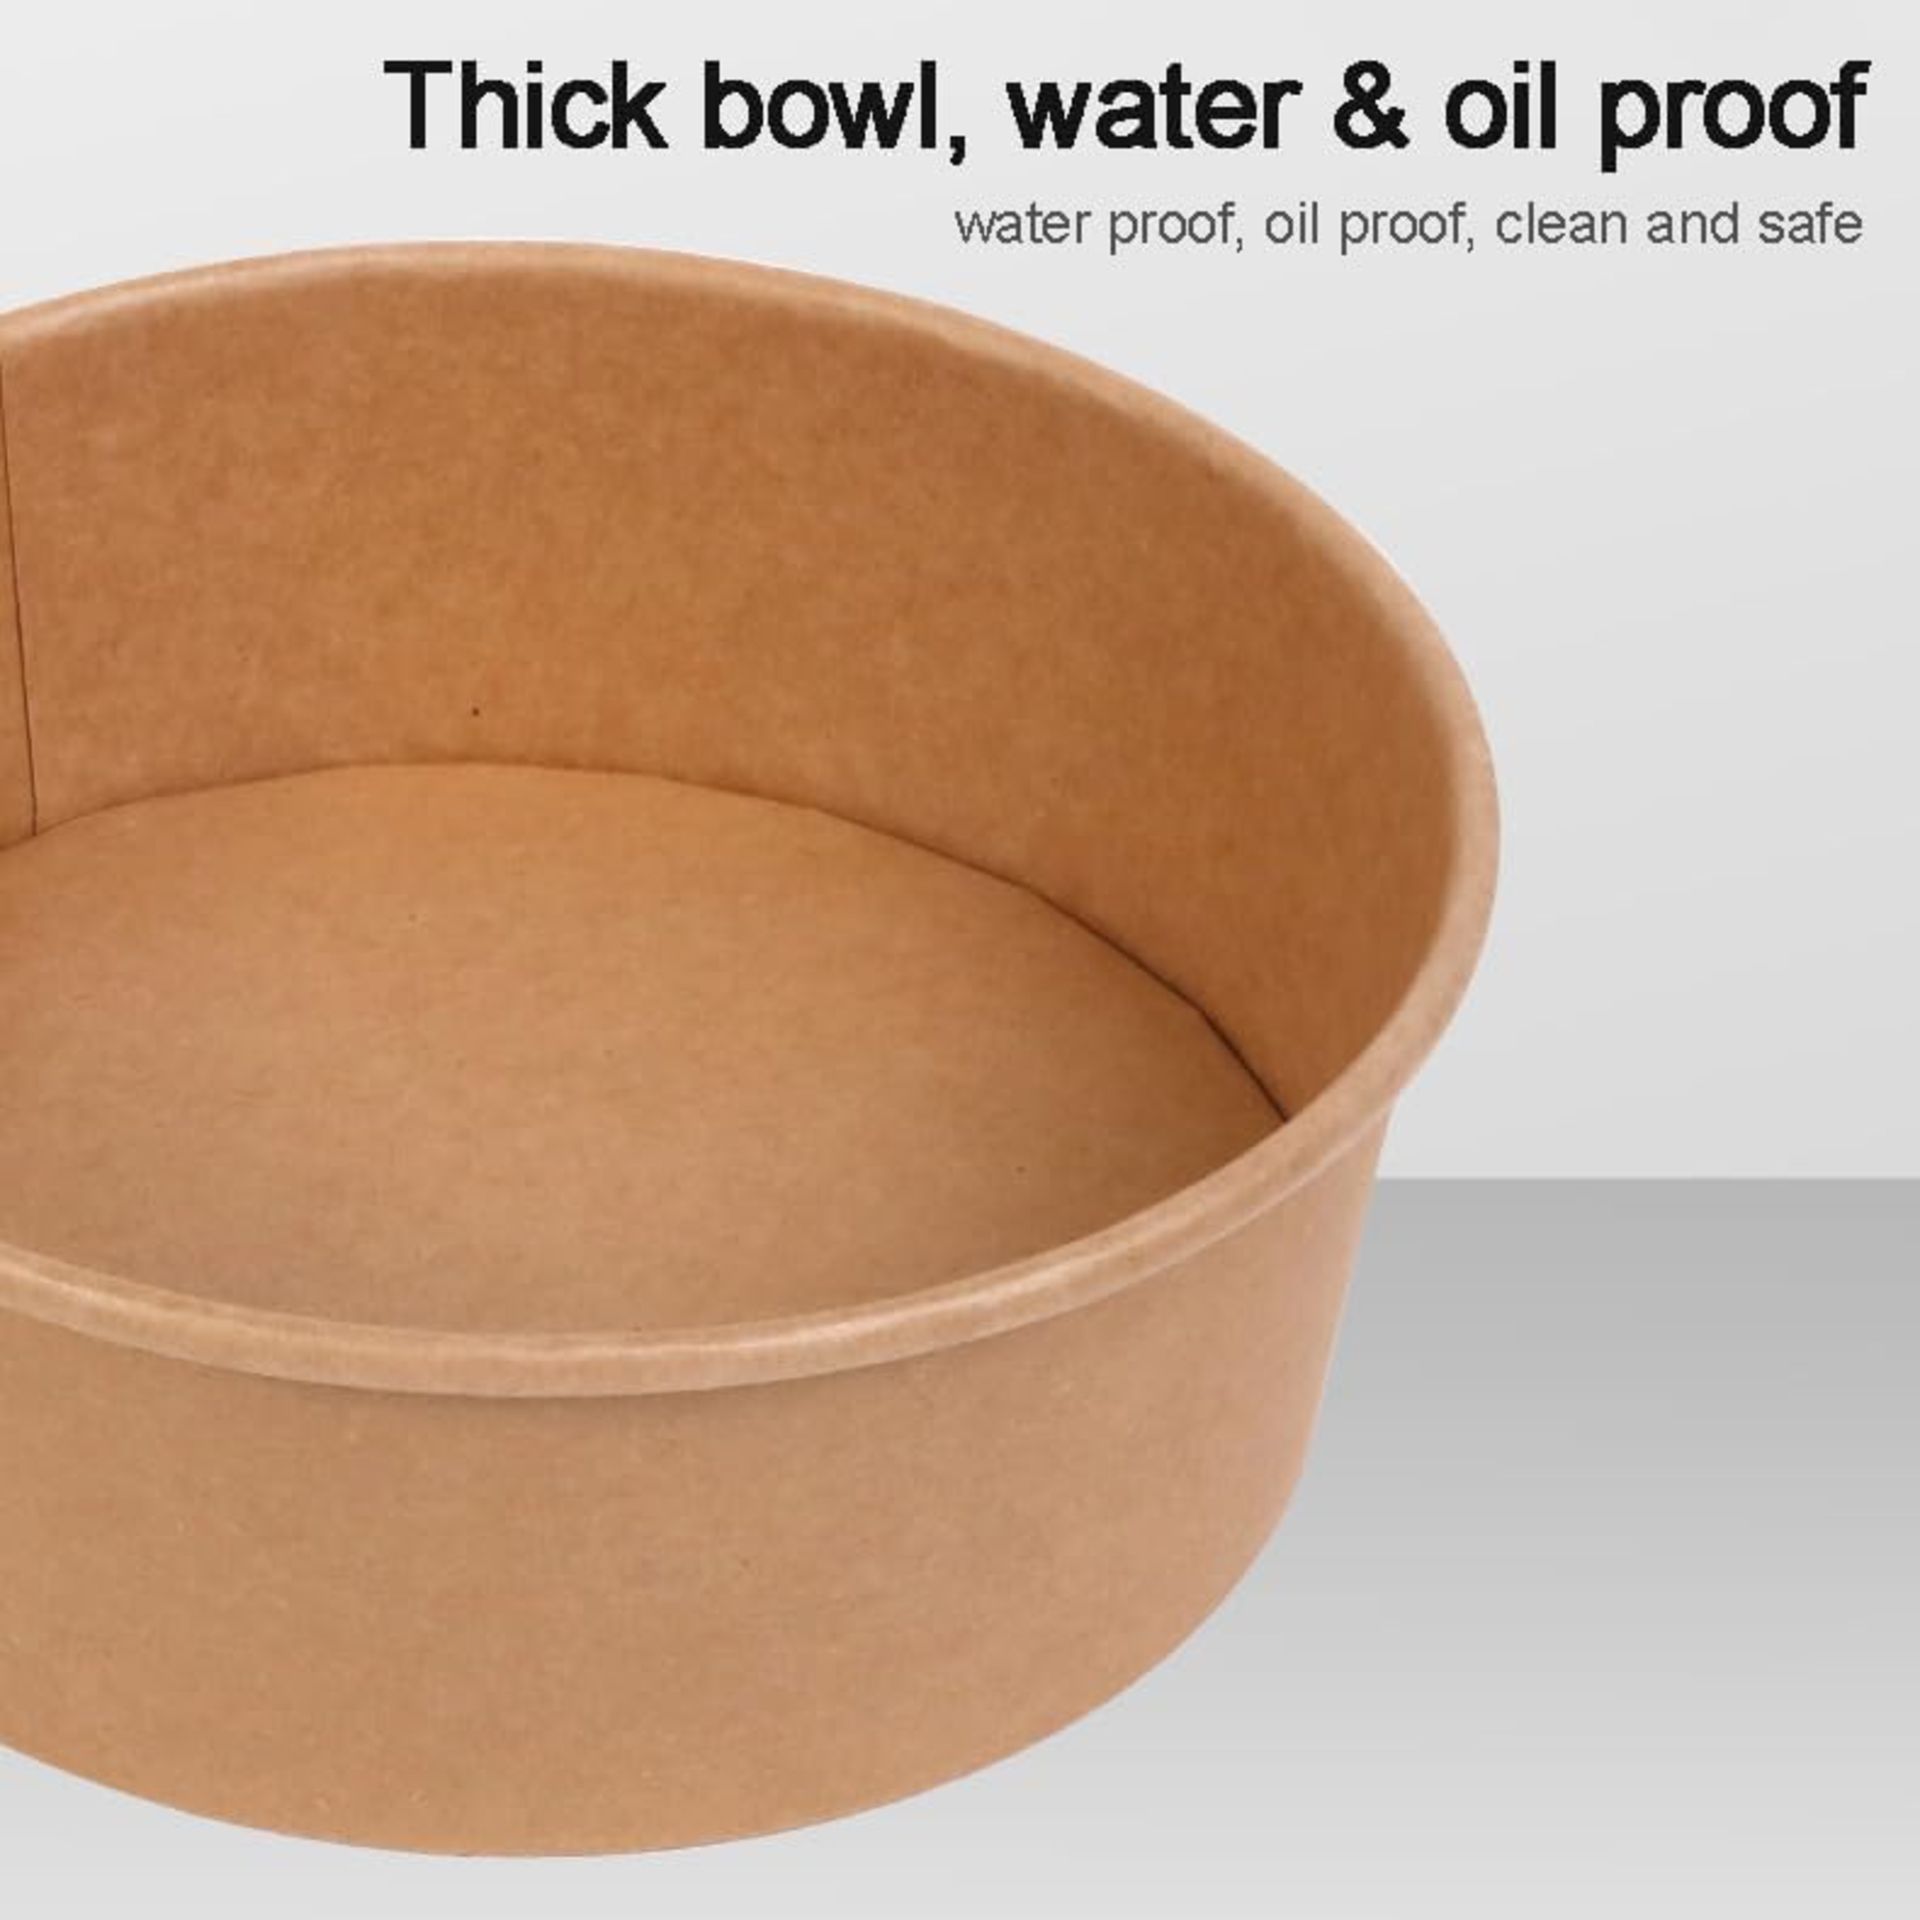 BOX OF 300 KRAFT TAKEAWAY ROUND SALAD BOWLS AND LIDS, SUPER LIGHT WEIGHT, 750 ML - Image 5 of 5